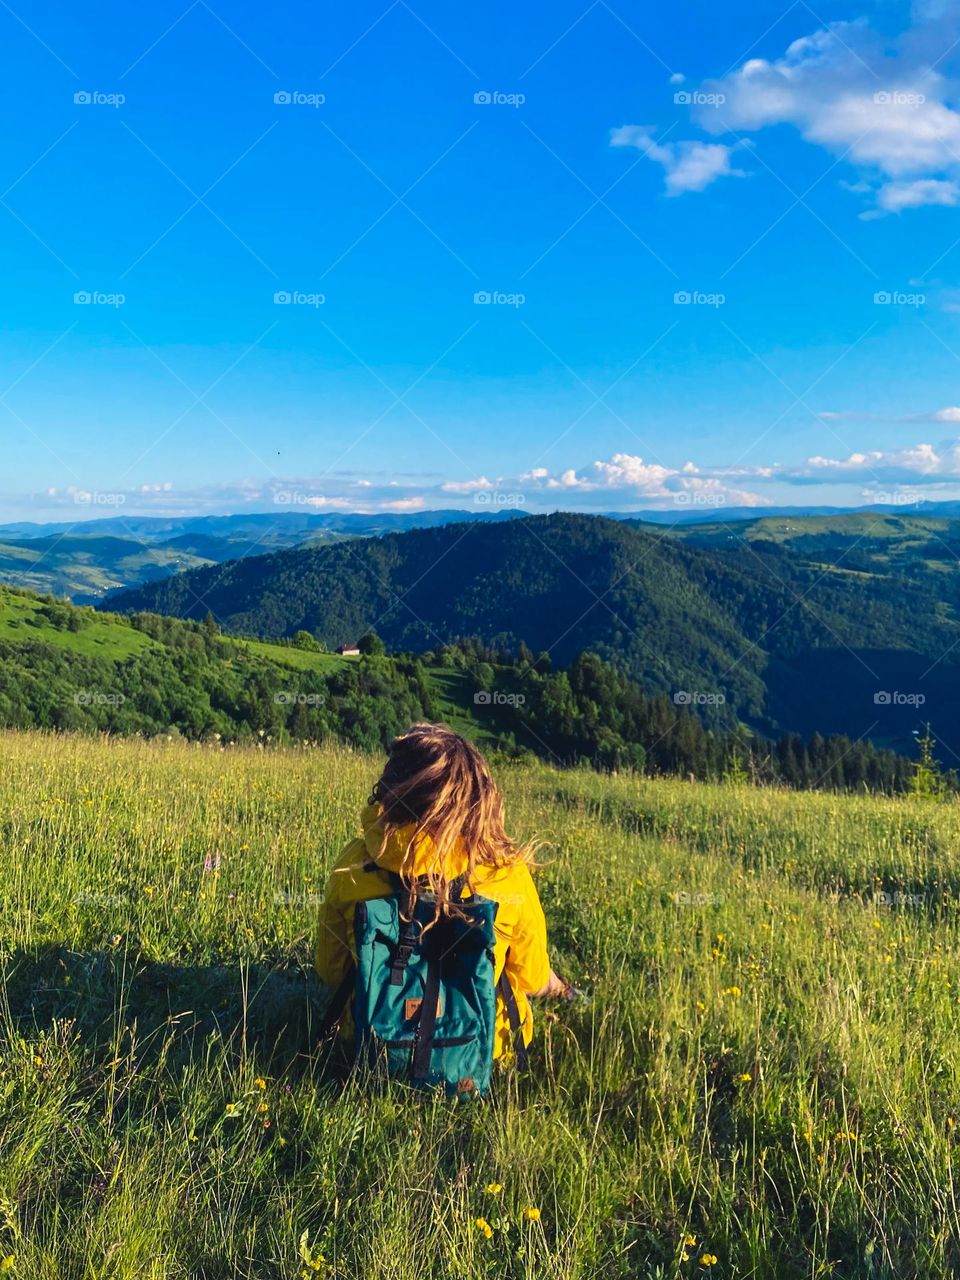 A girl in a yellow raincoat is sitting and watching at the mountains.